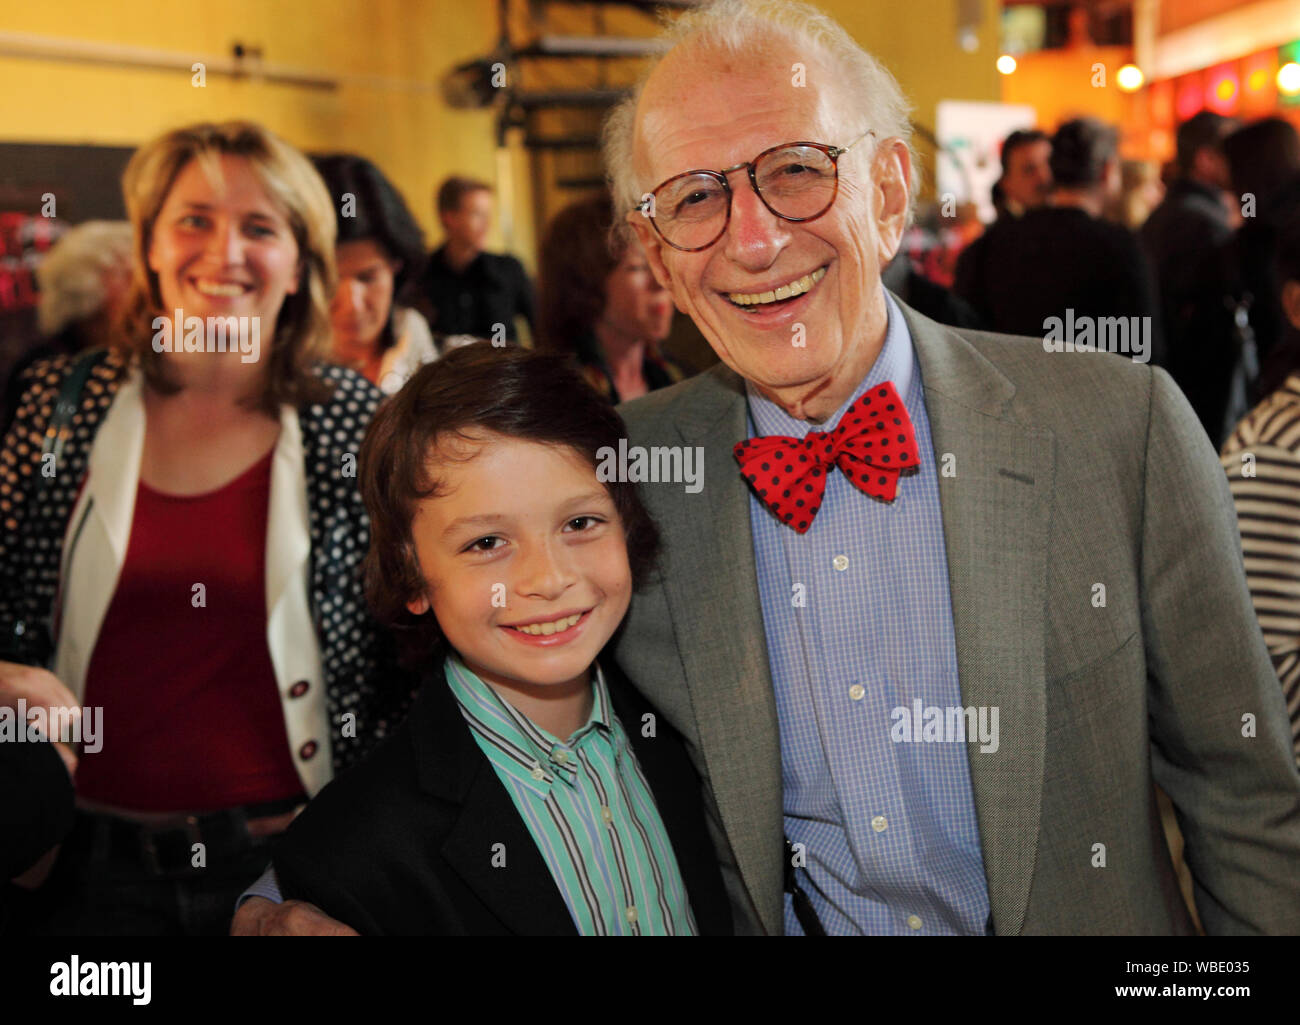 Nobel Prize winner Eric Kandel attends the film premiere of his documentary film 'In Search of Memory' in Cologne, Germany Stock Photo